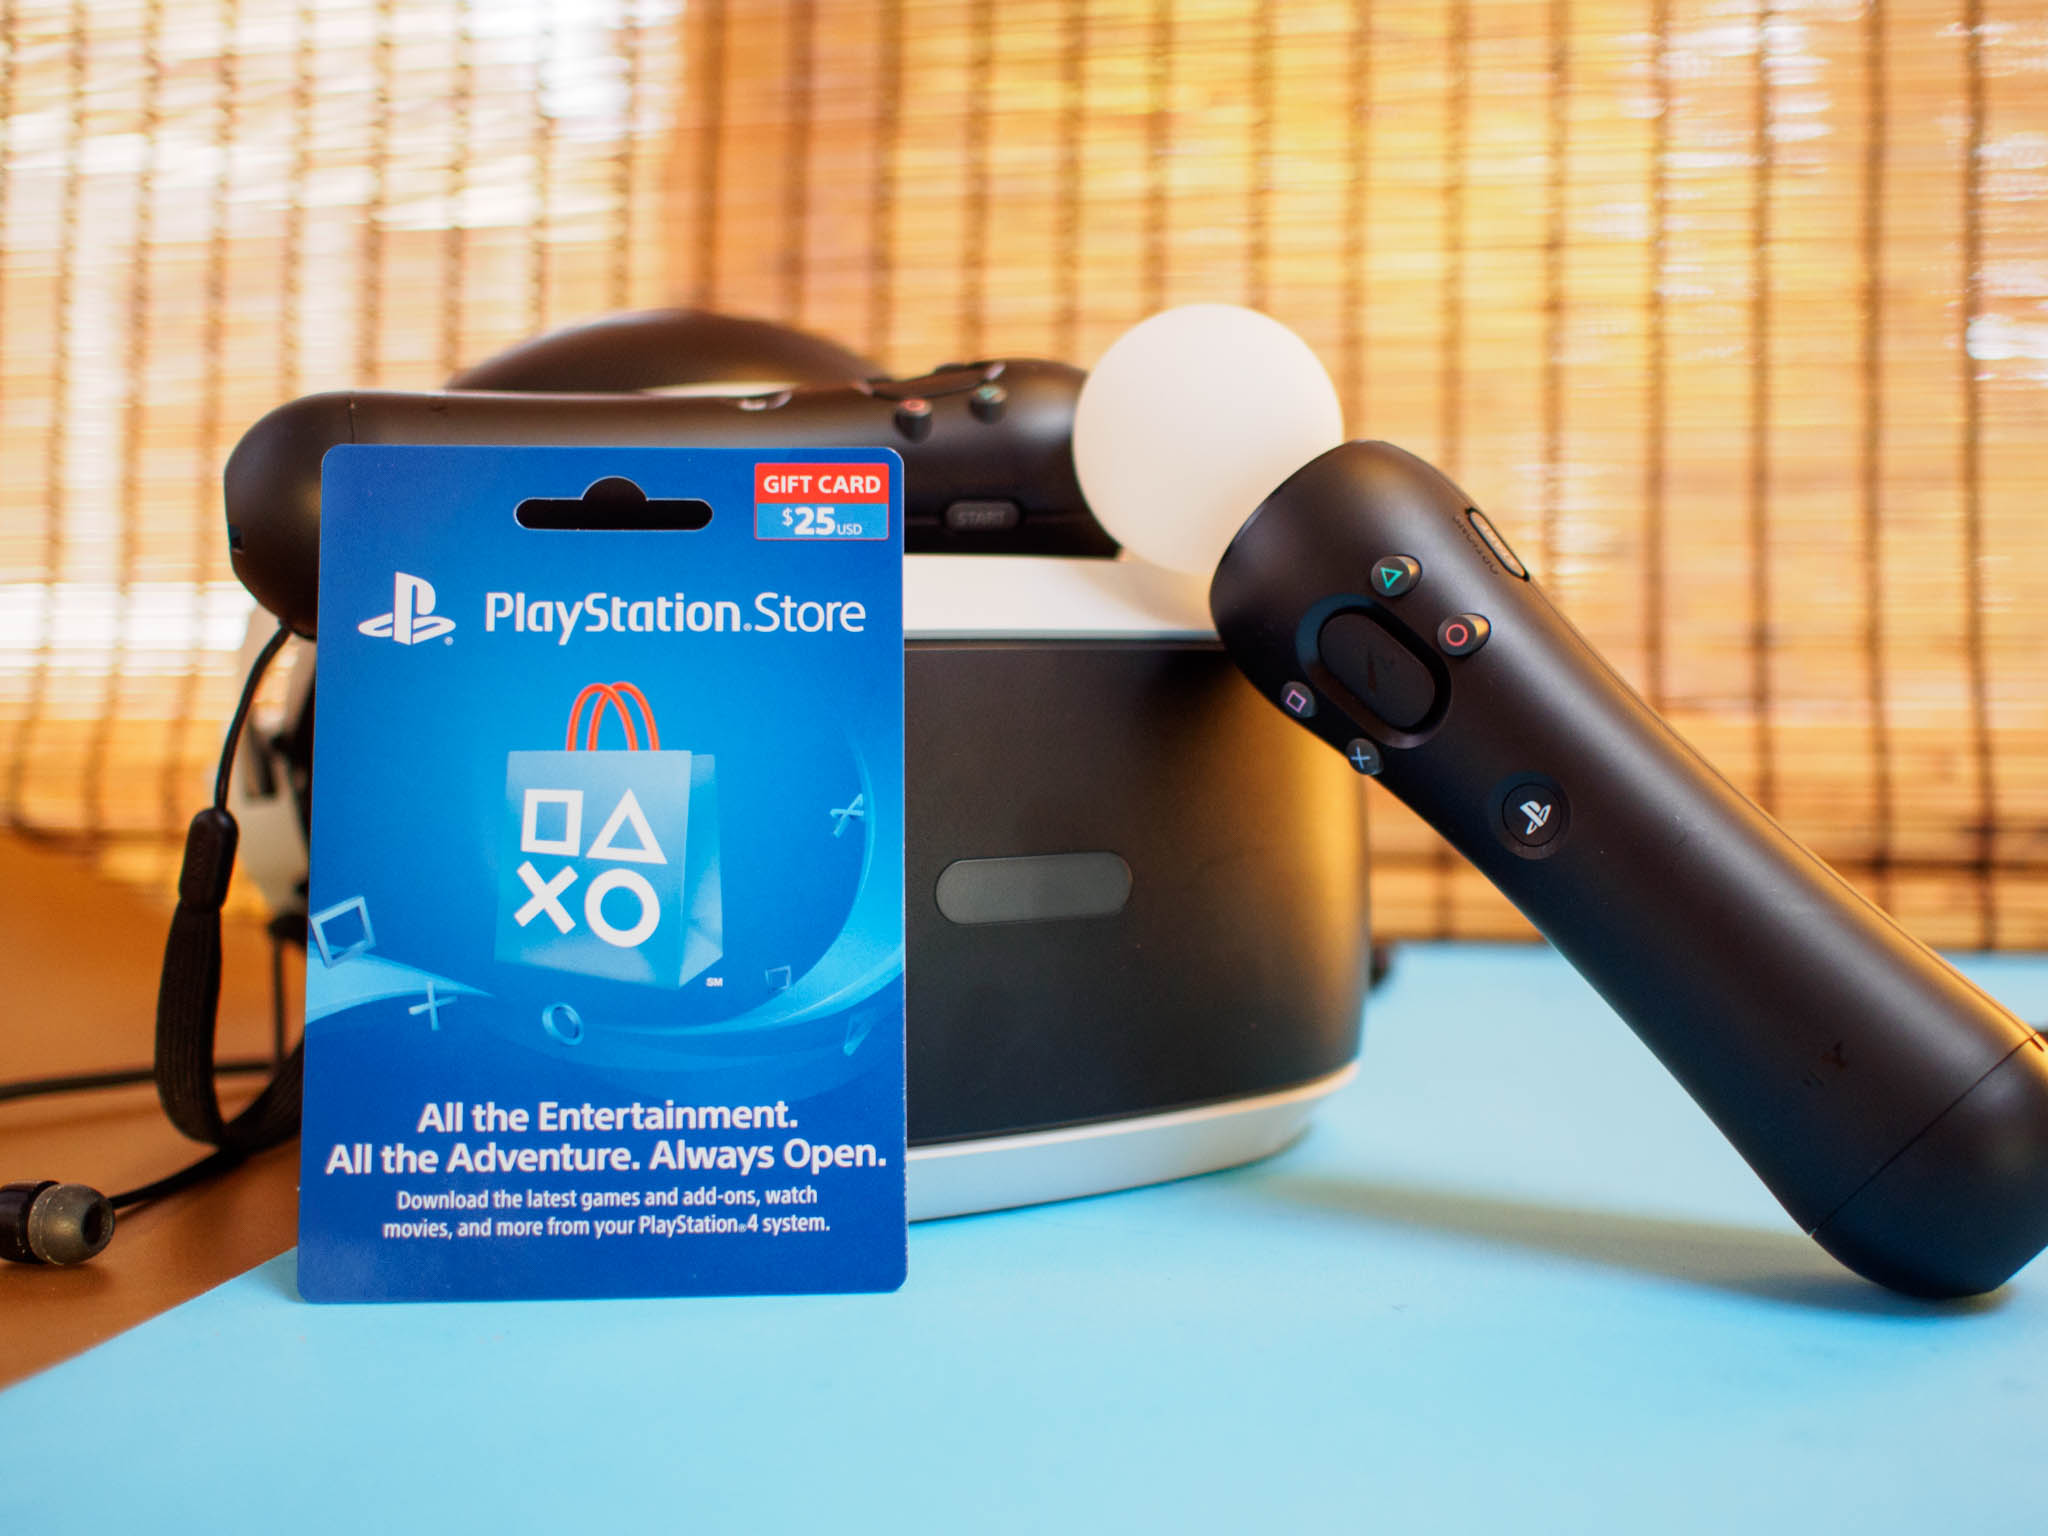 Do you have a PlayStation gift card? This is how to use it!